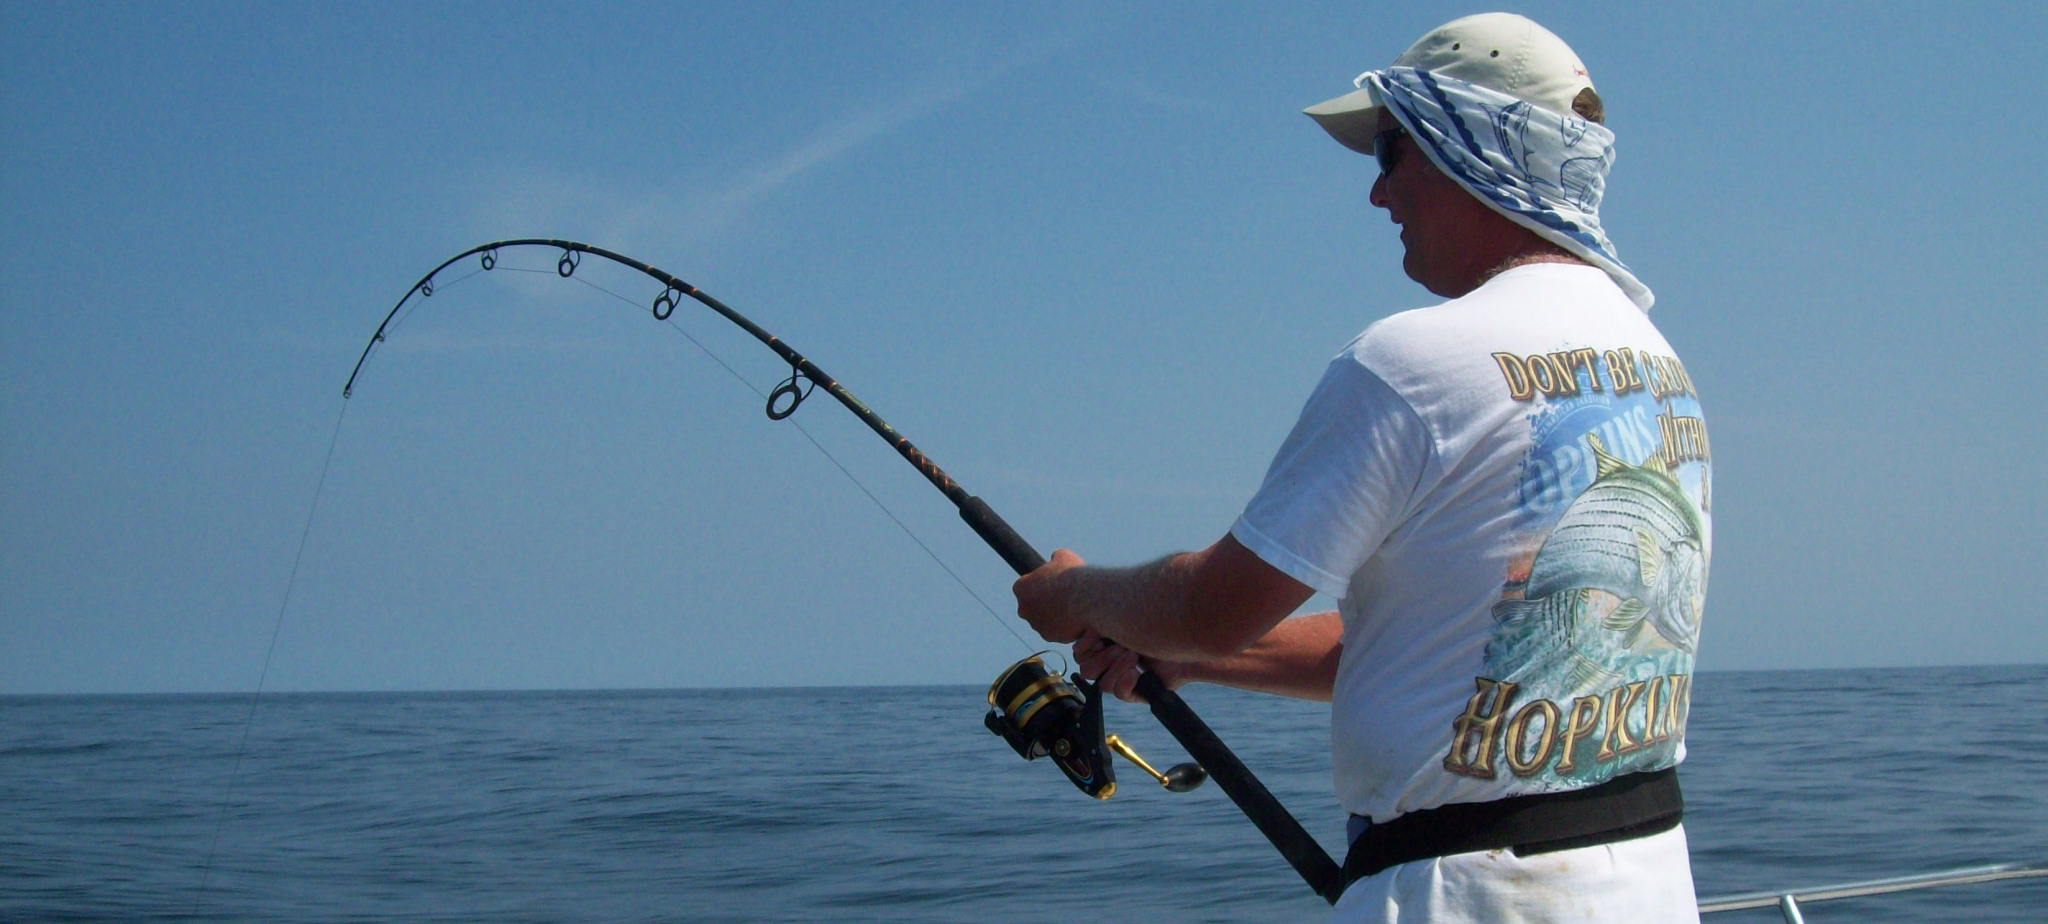 Choosing the right saltwater fishing rod